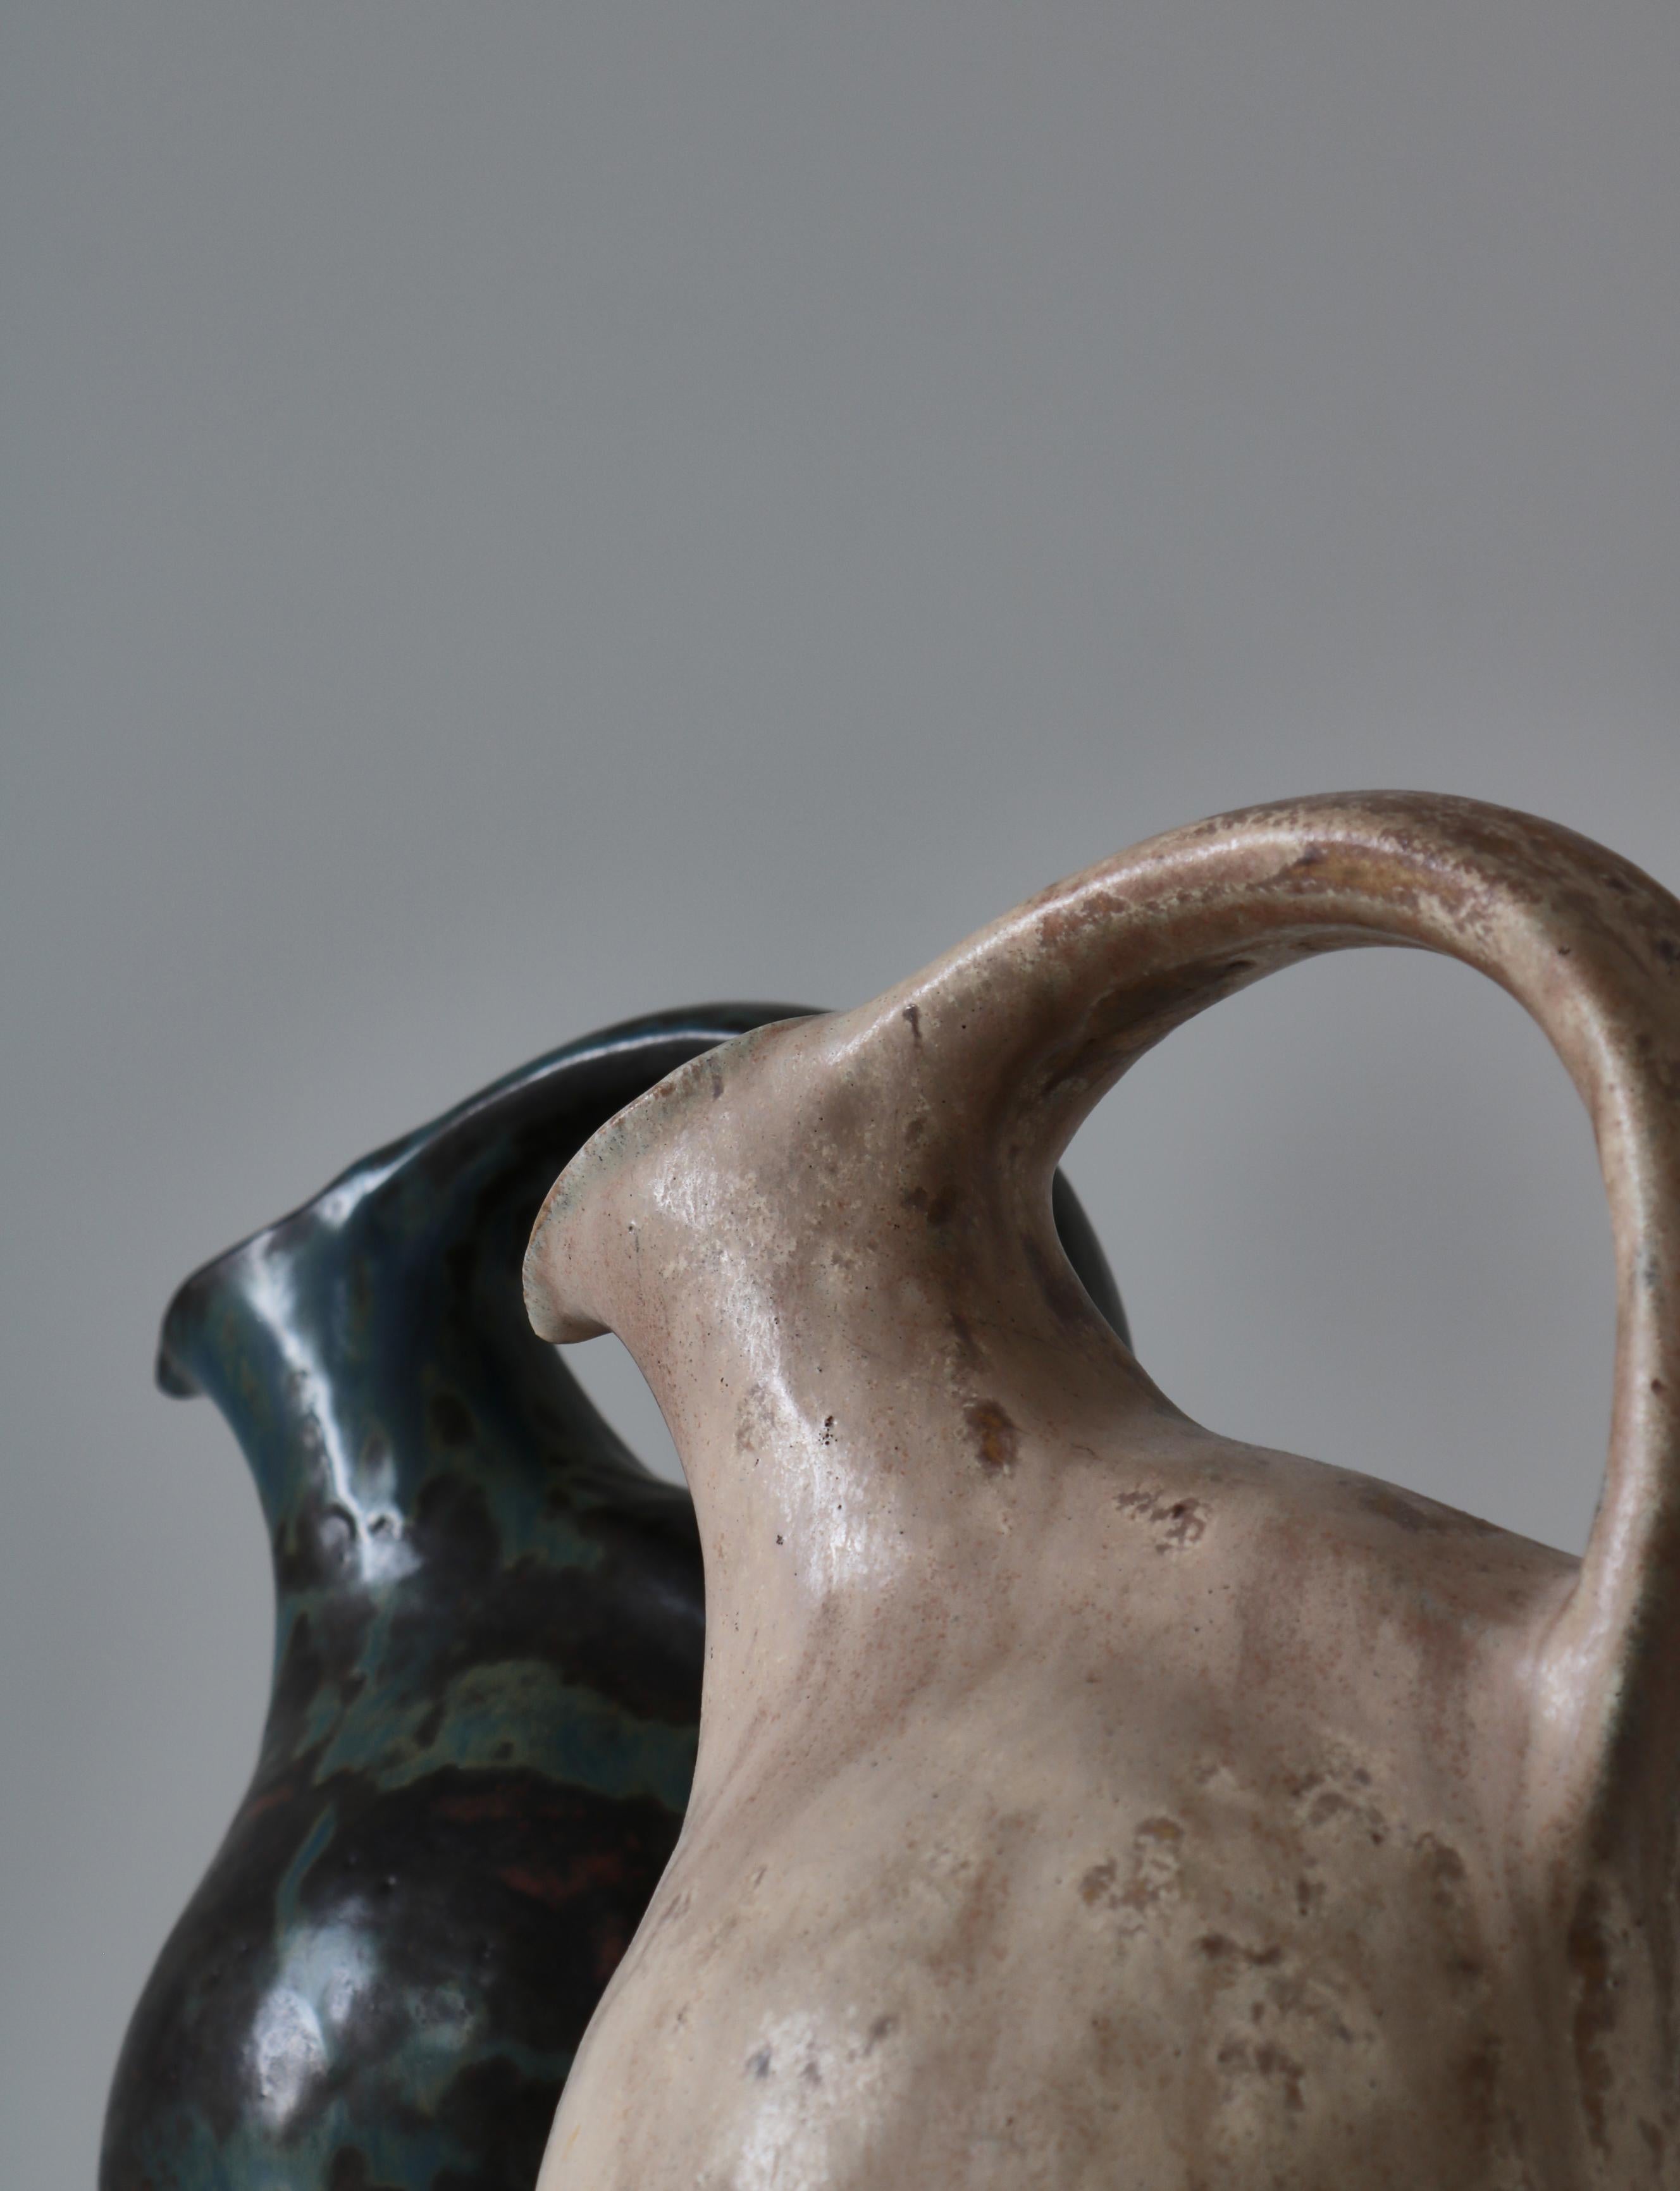 Pair of Unique Bode Willumsen Ceramic Pitchers from Own Studio, 1930s For Sale 10